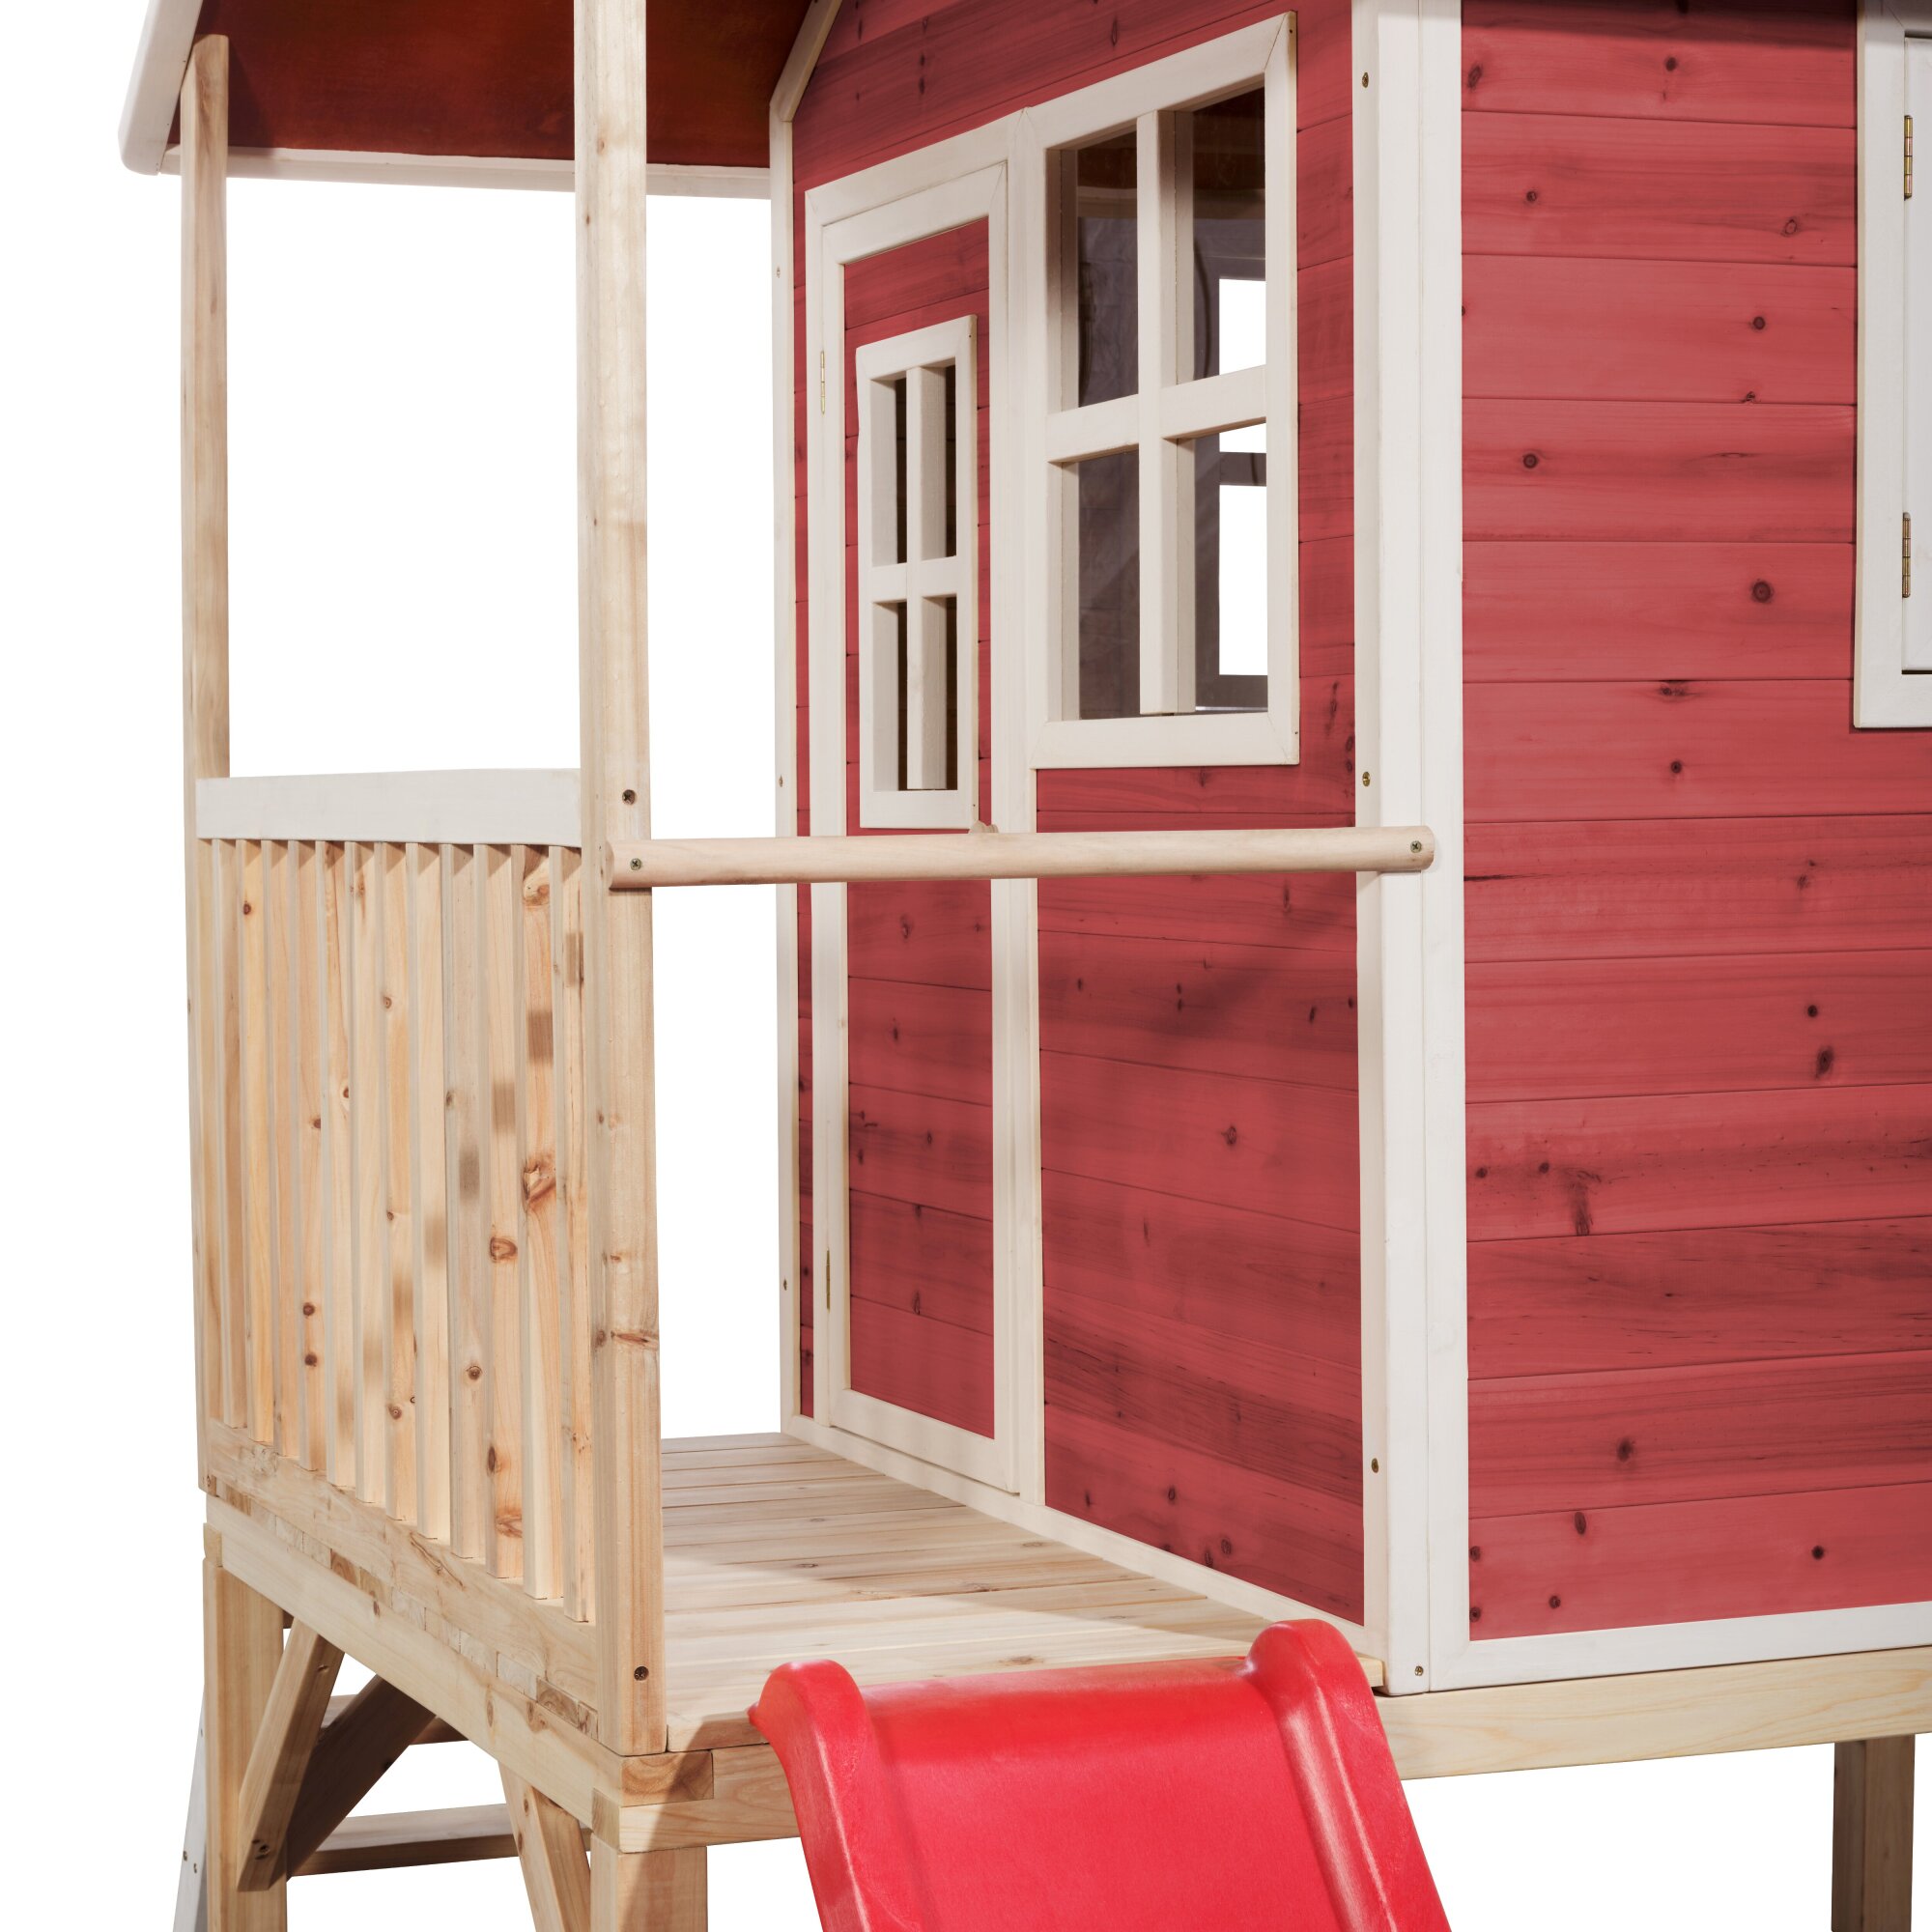 EXIT Loft 300 wooden playhouse - red